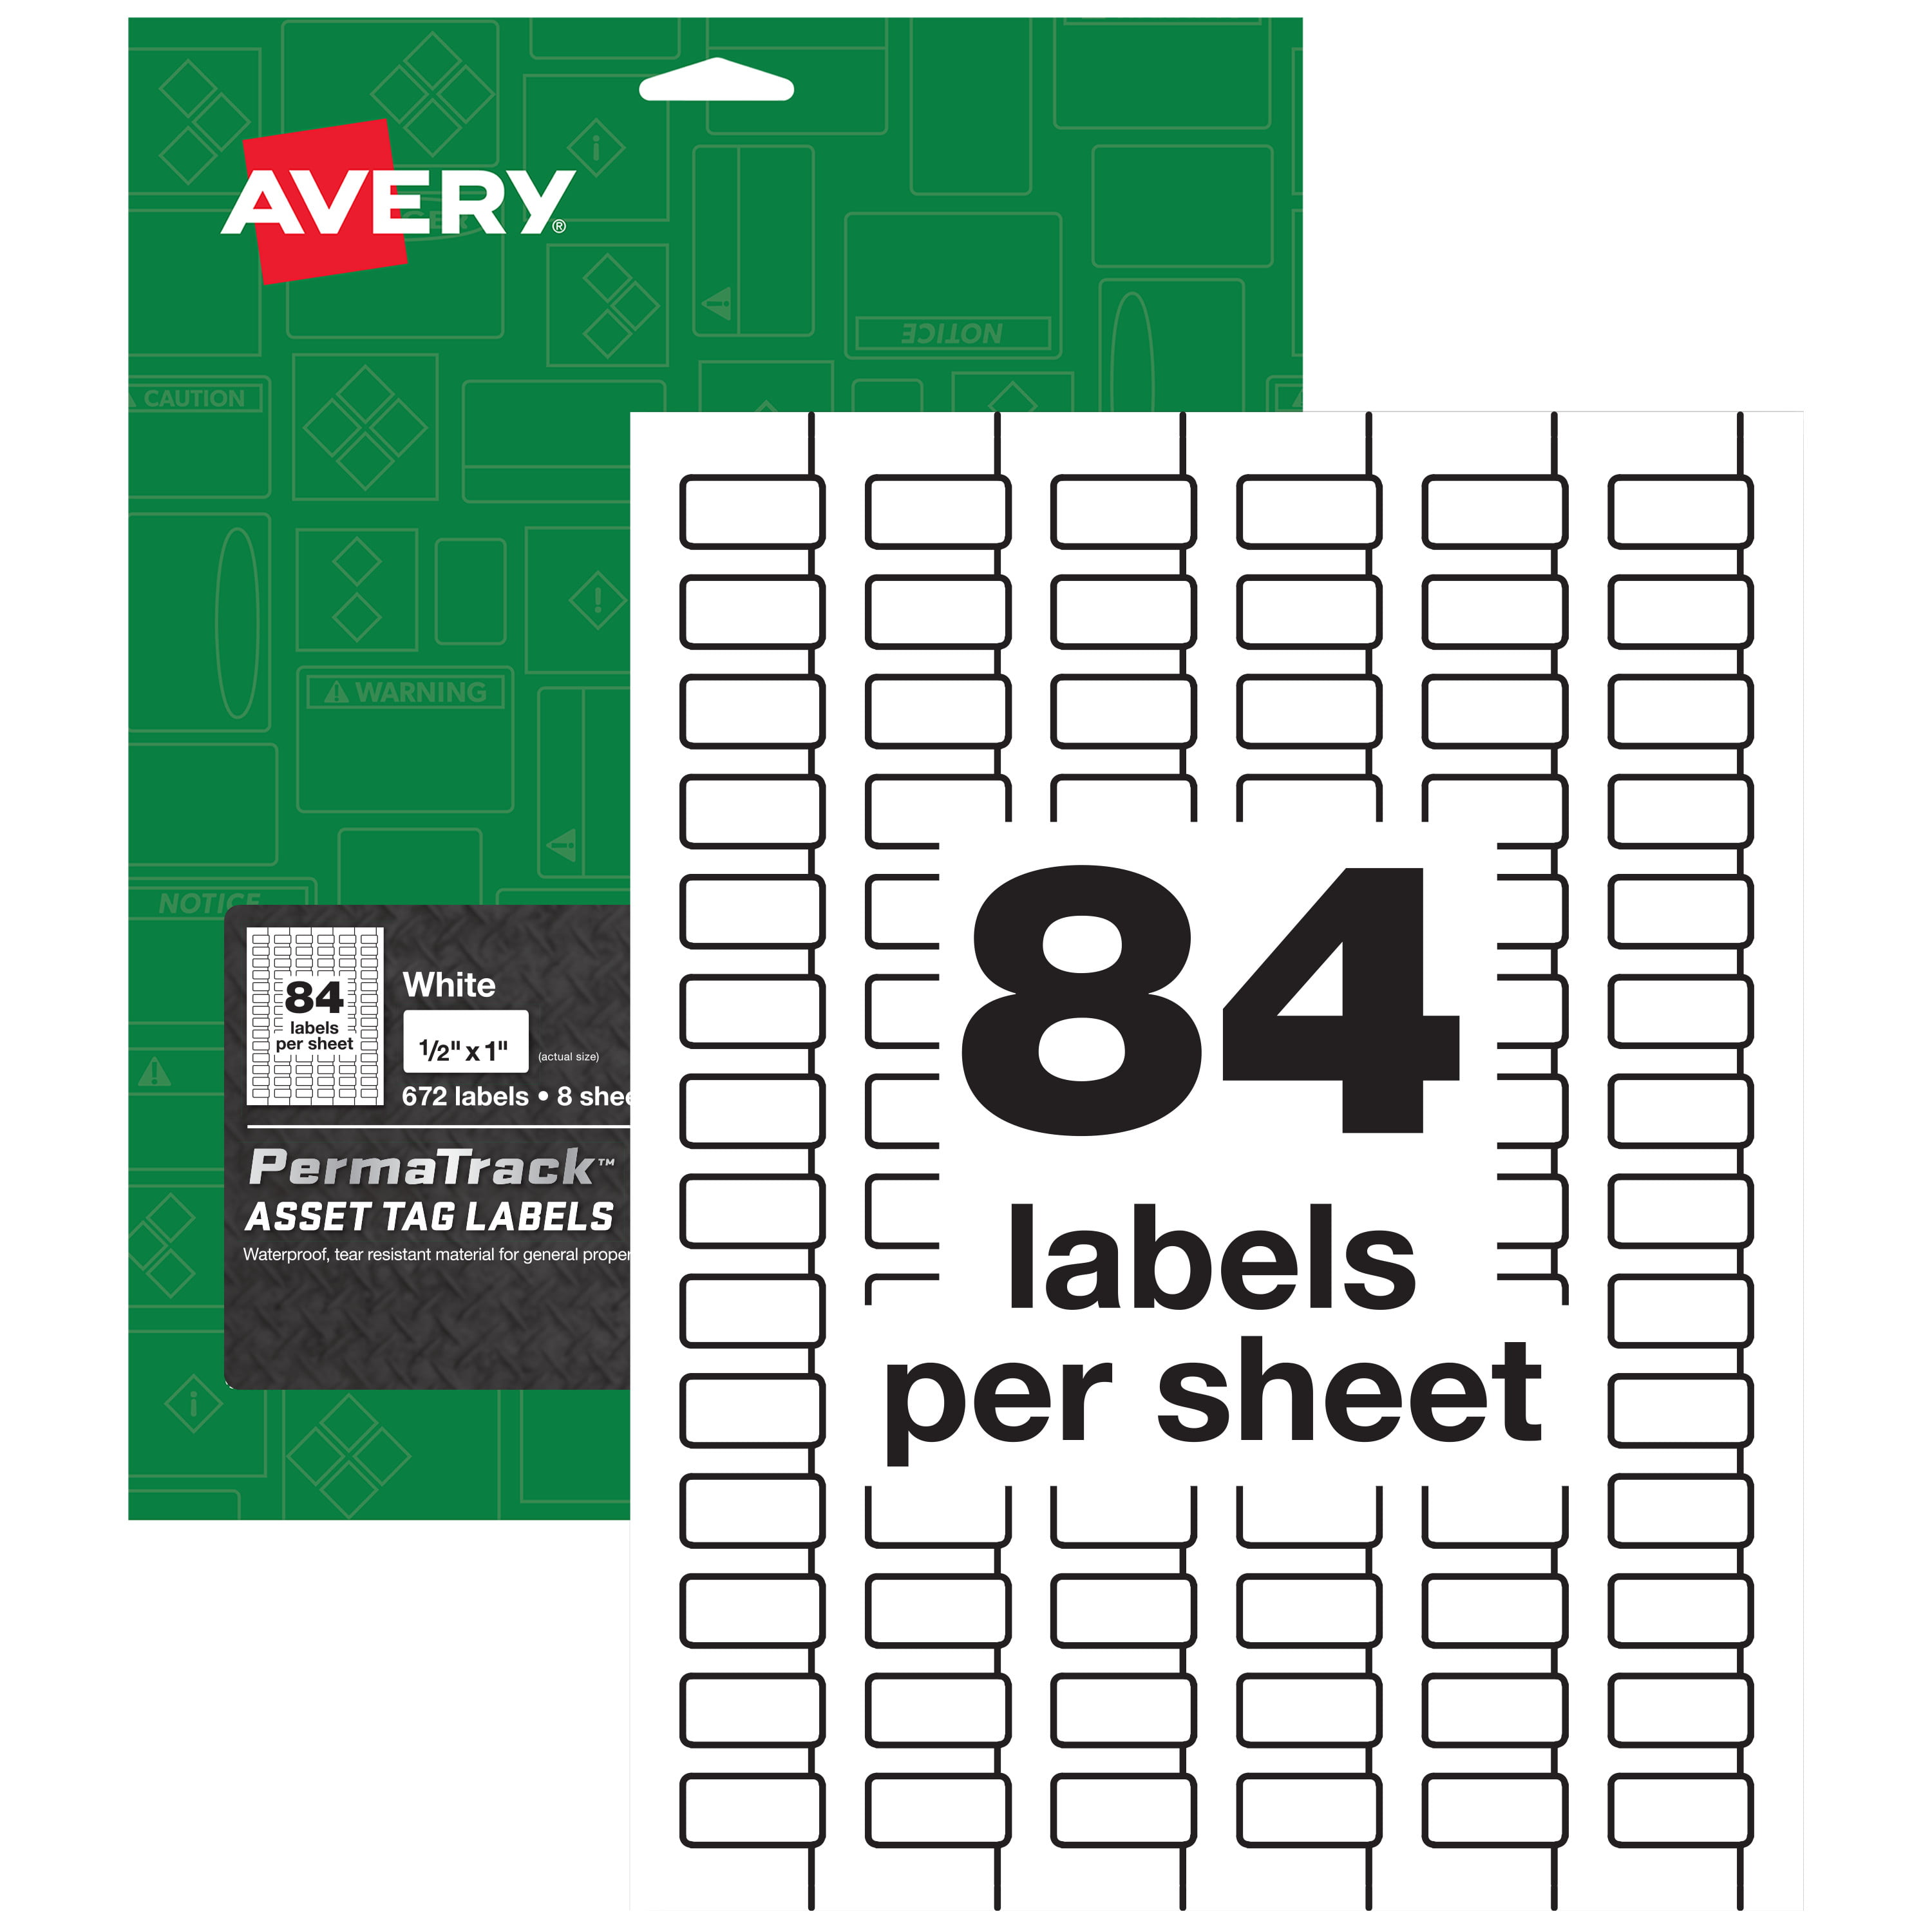 avery-permatrack-durable-white-asset-tag-labels-1-2-x-1-672-asset